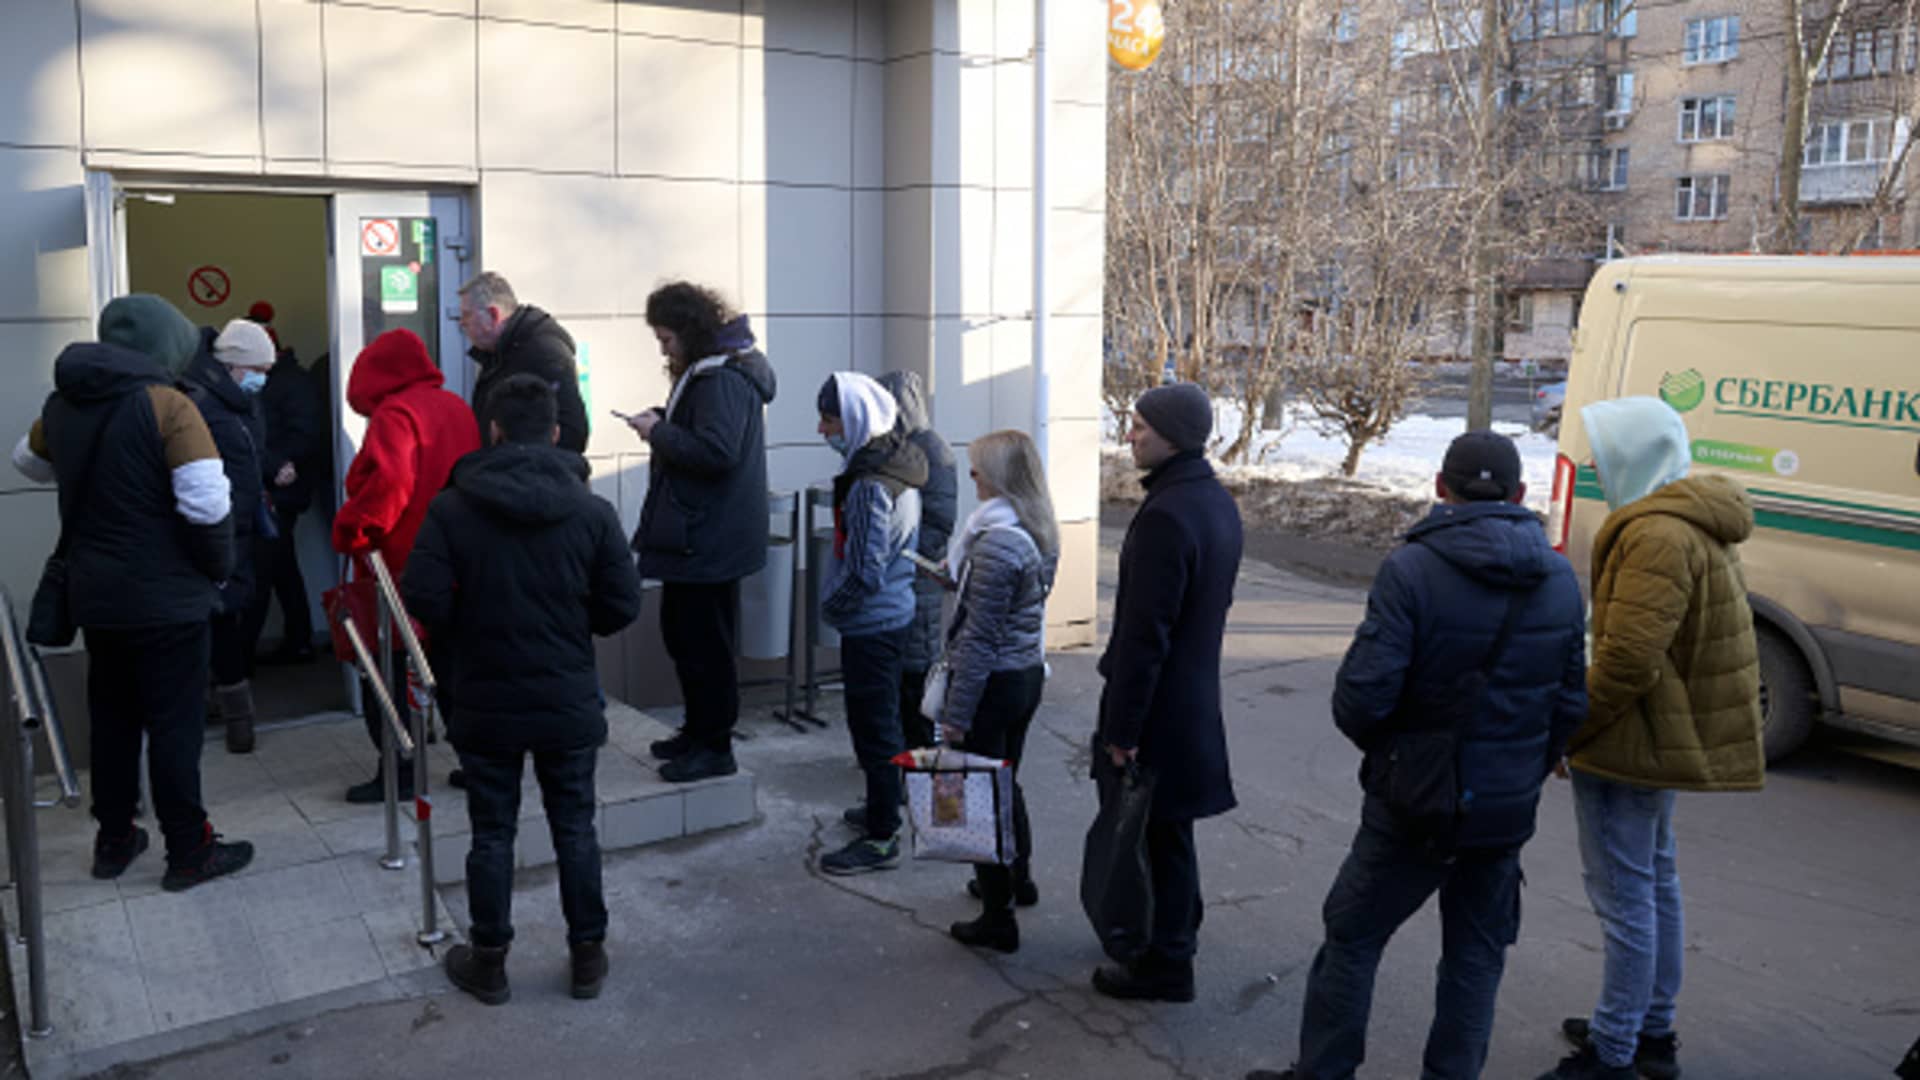 People queue at a Sberbank branch. On 24 February, the United States announced it was imposing sanctions on major Russian banks, including Sberbank and VTB in response to the special military operation in Ukraine.